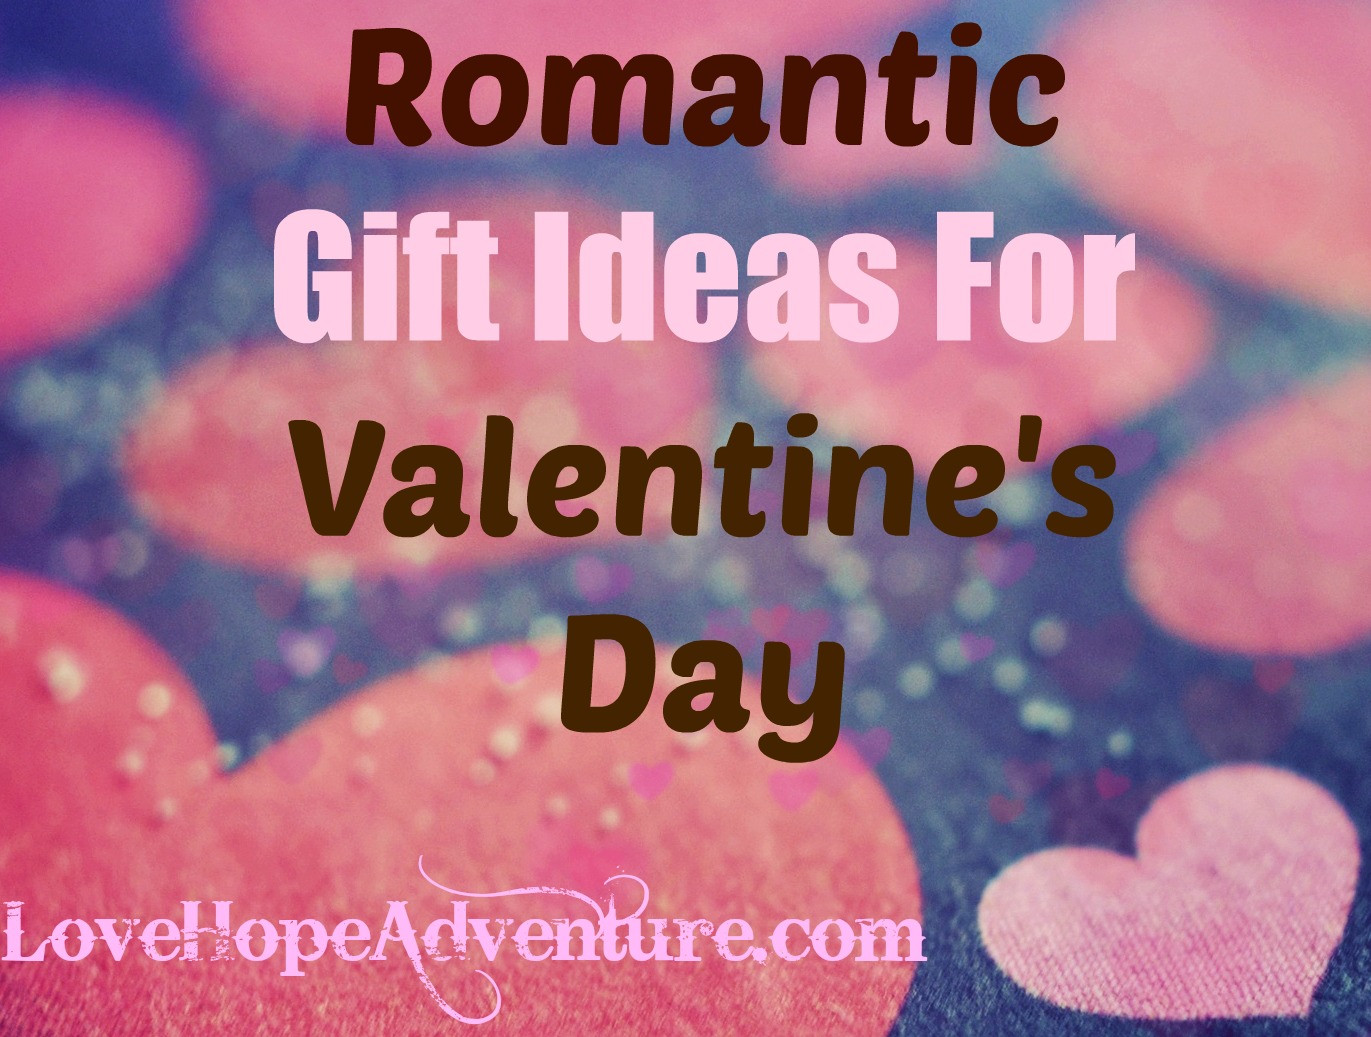 Romantic Valentines Day Gift Ideas
 Fun and Romantic Gift Ideas for Valentine s Day Love